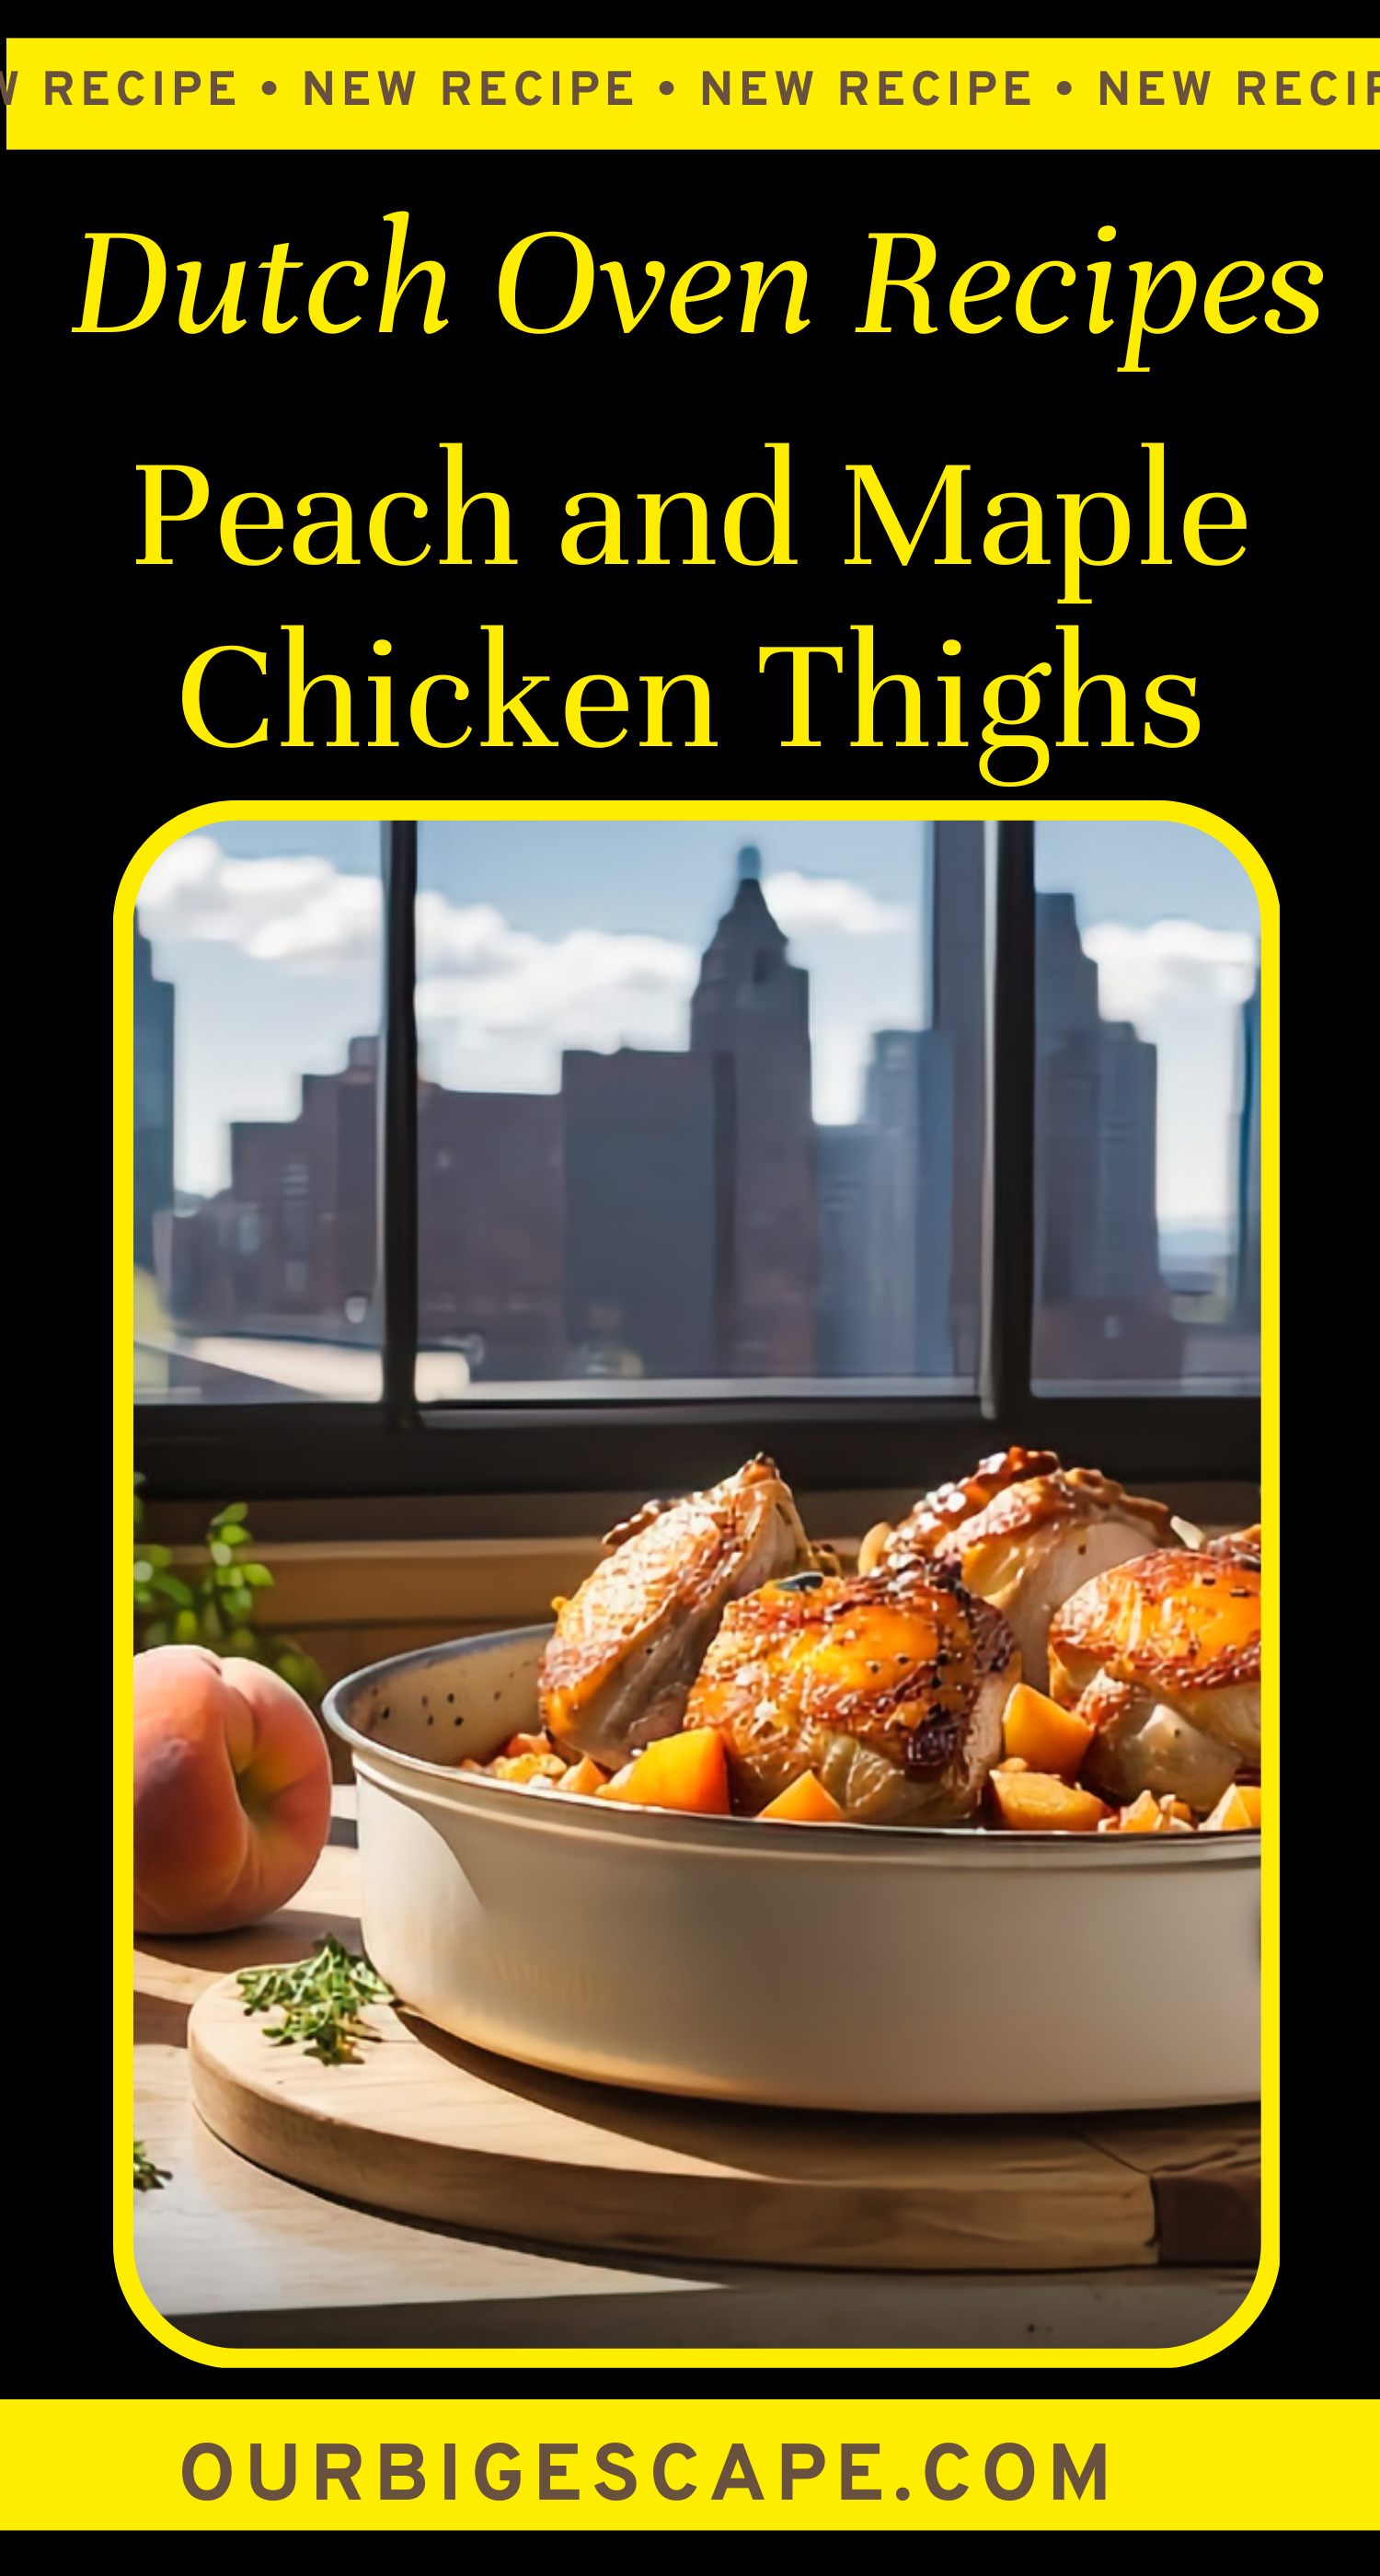 10. Dutch Oven Peach and Maple Chicken Thighs Recipe